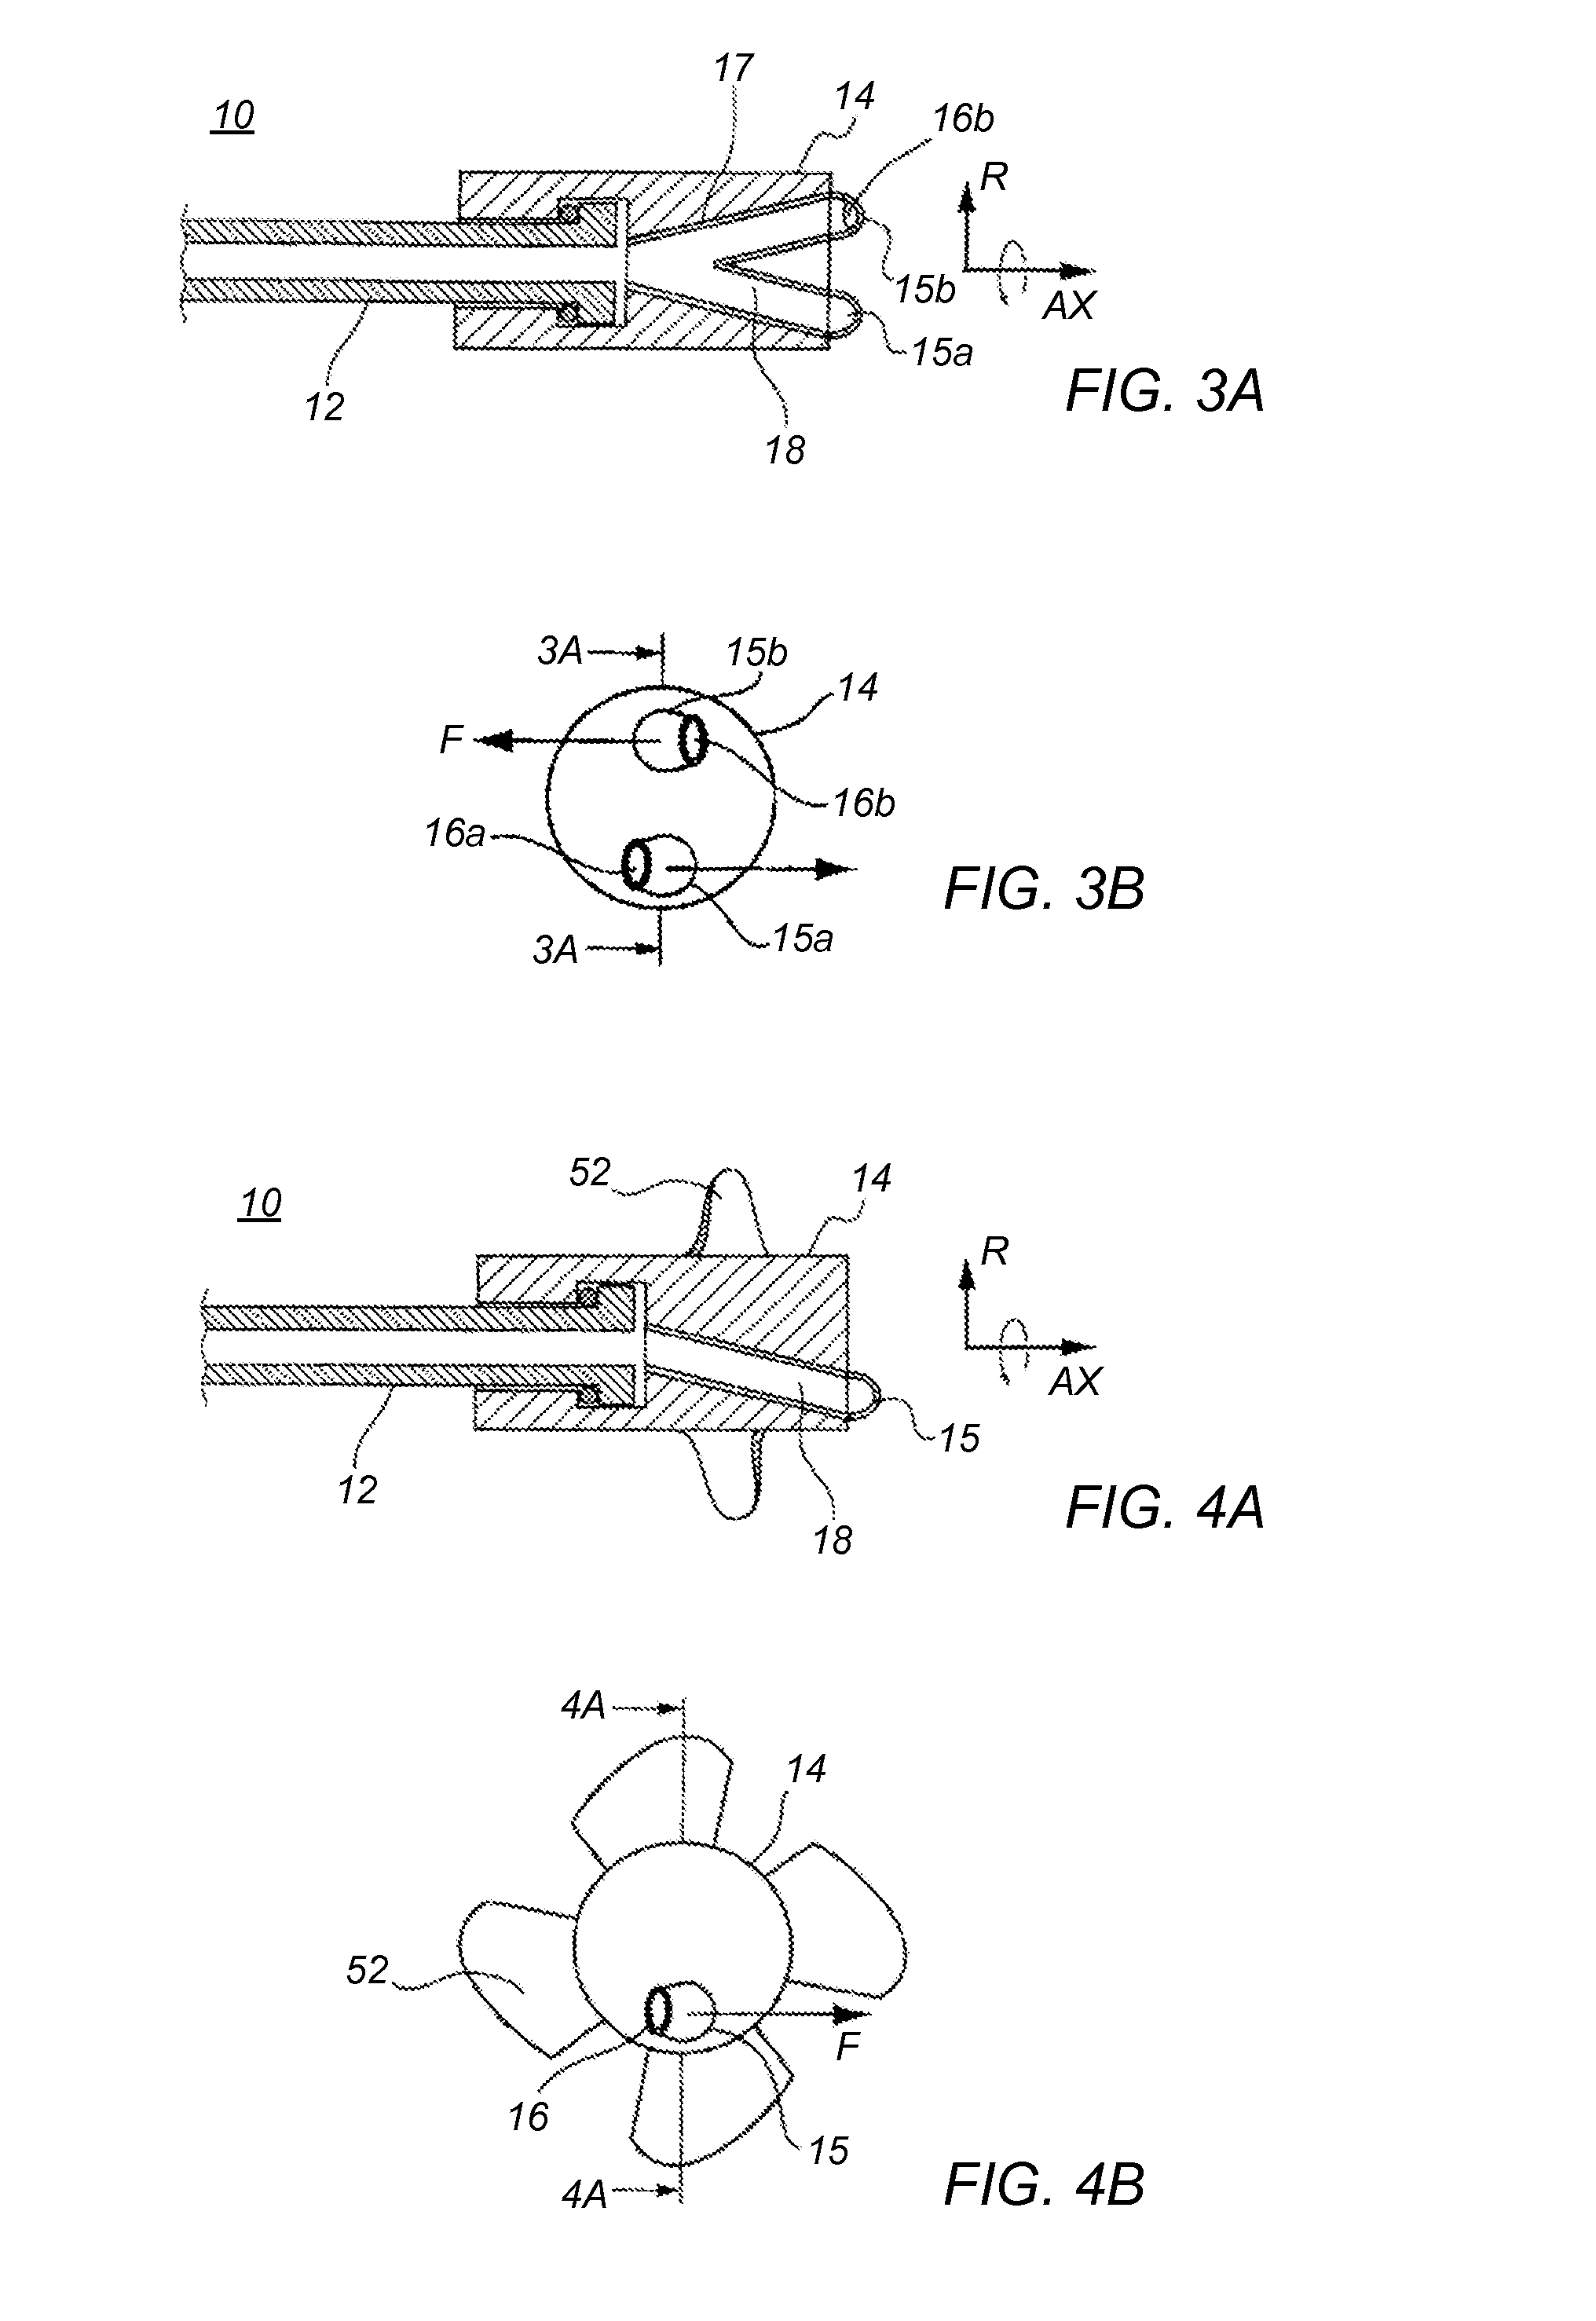 Nozzle system and method